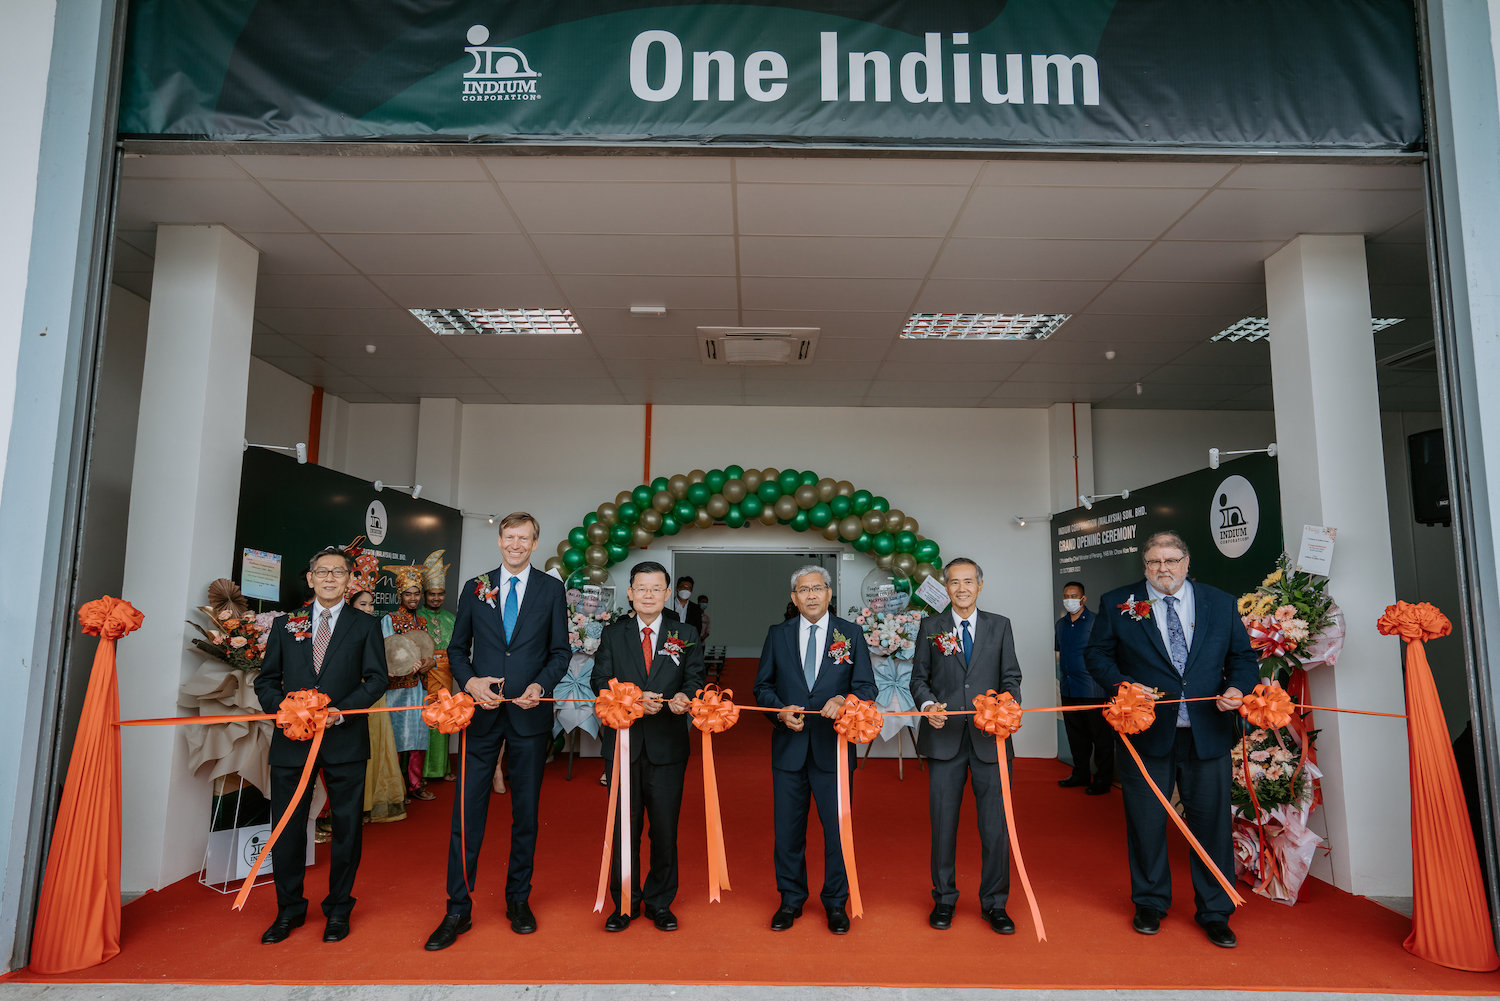 Indium Corporation and Malaysian officials prepare to cut the ribbon on the Clinton-headquartered company’s new facility in the Asian nation.